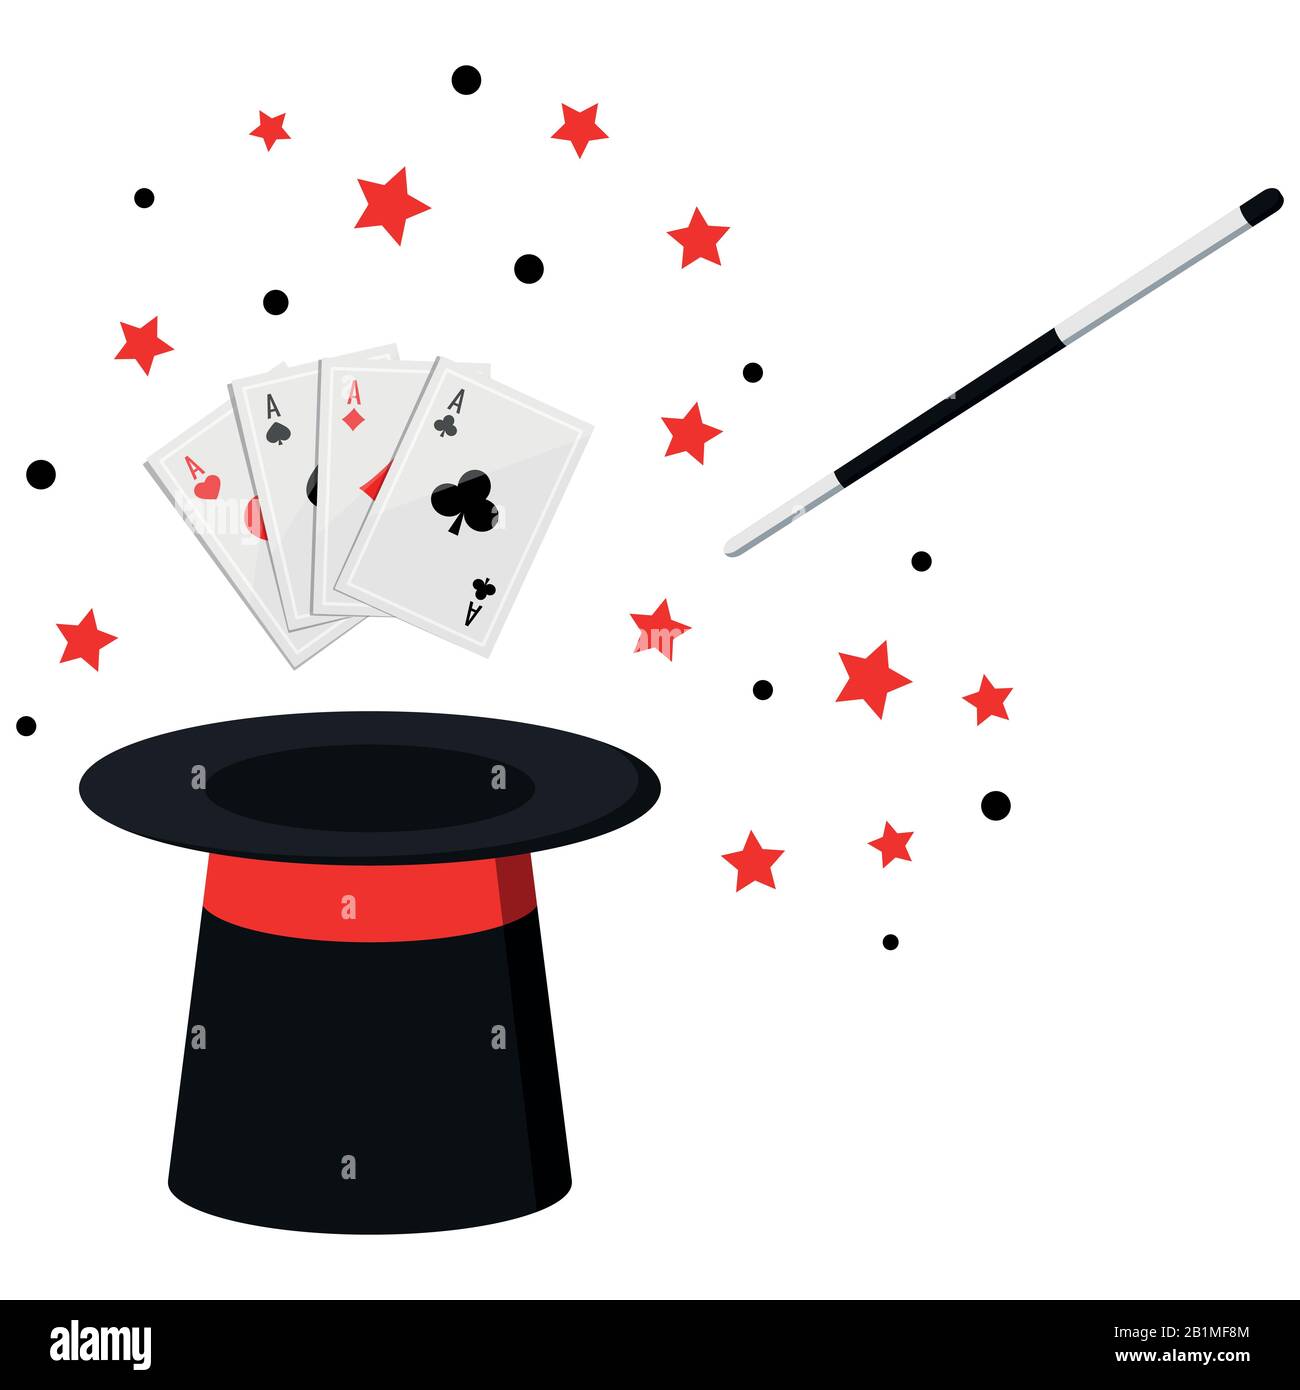 Kind entertainment magic hat Cut Out Stock Images & Pictures - Alamy